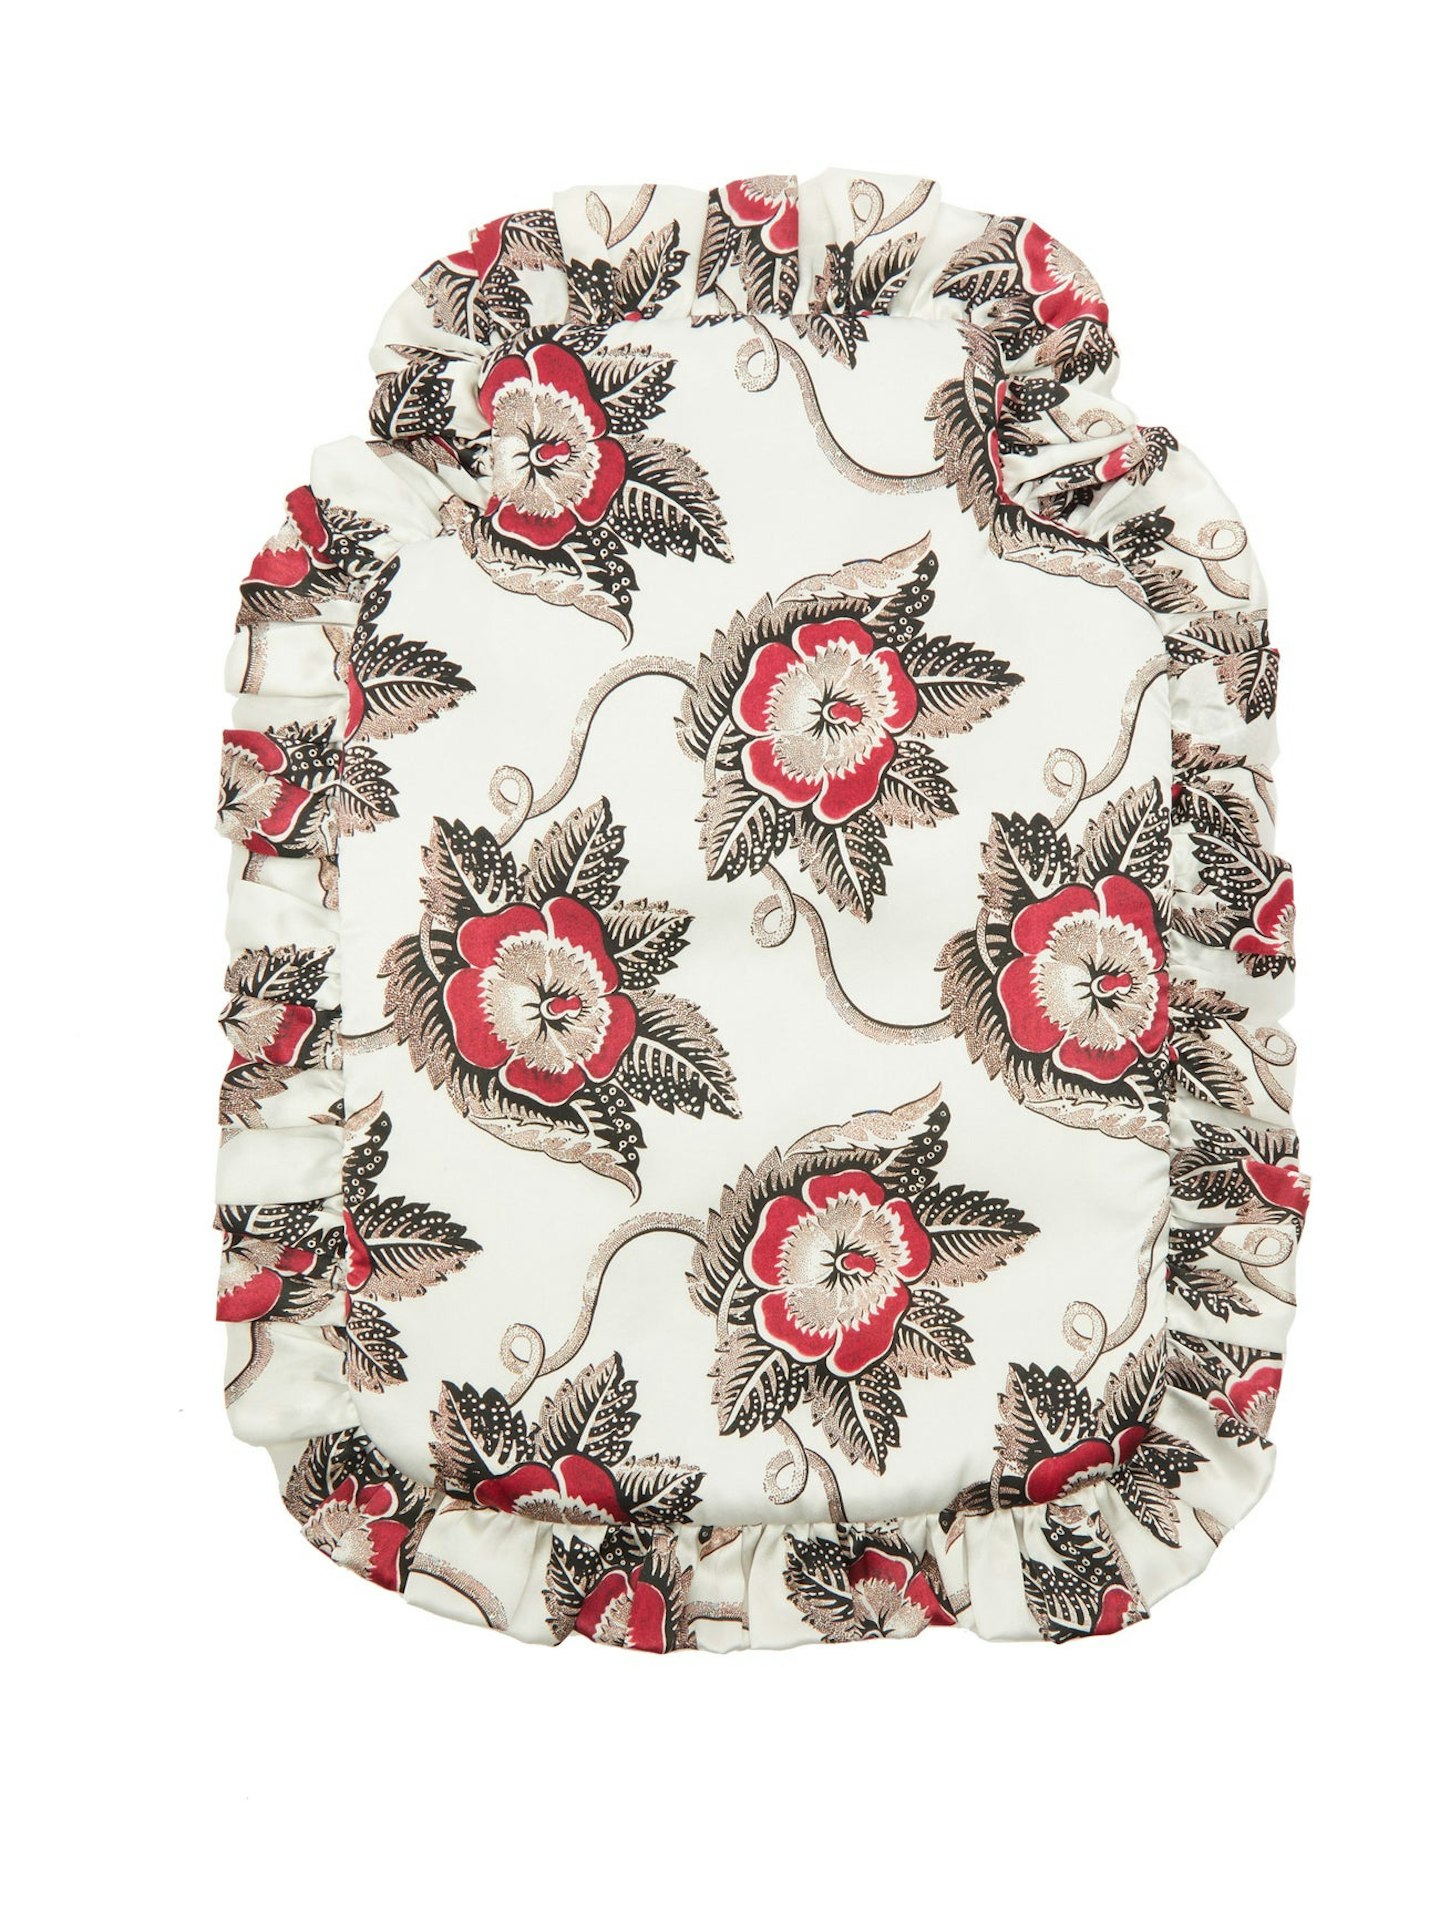 Floral Print Hot Water Bottle Cover, £165